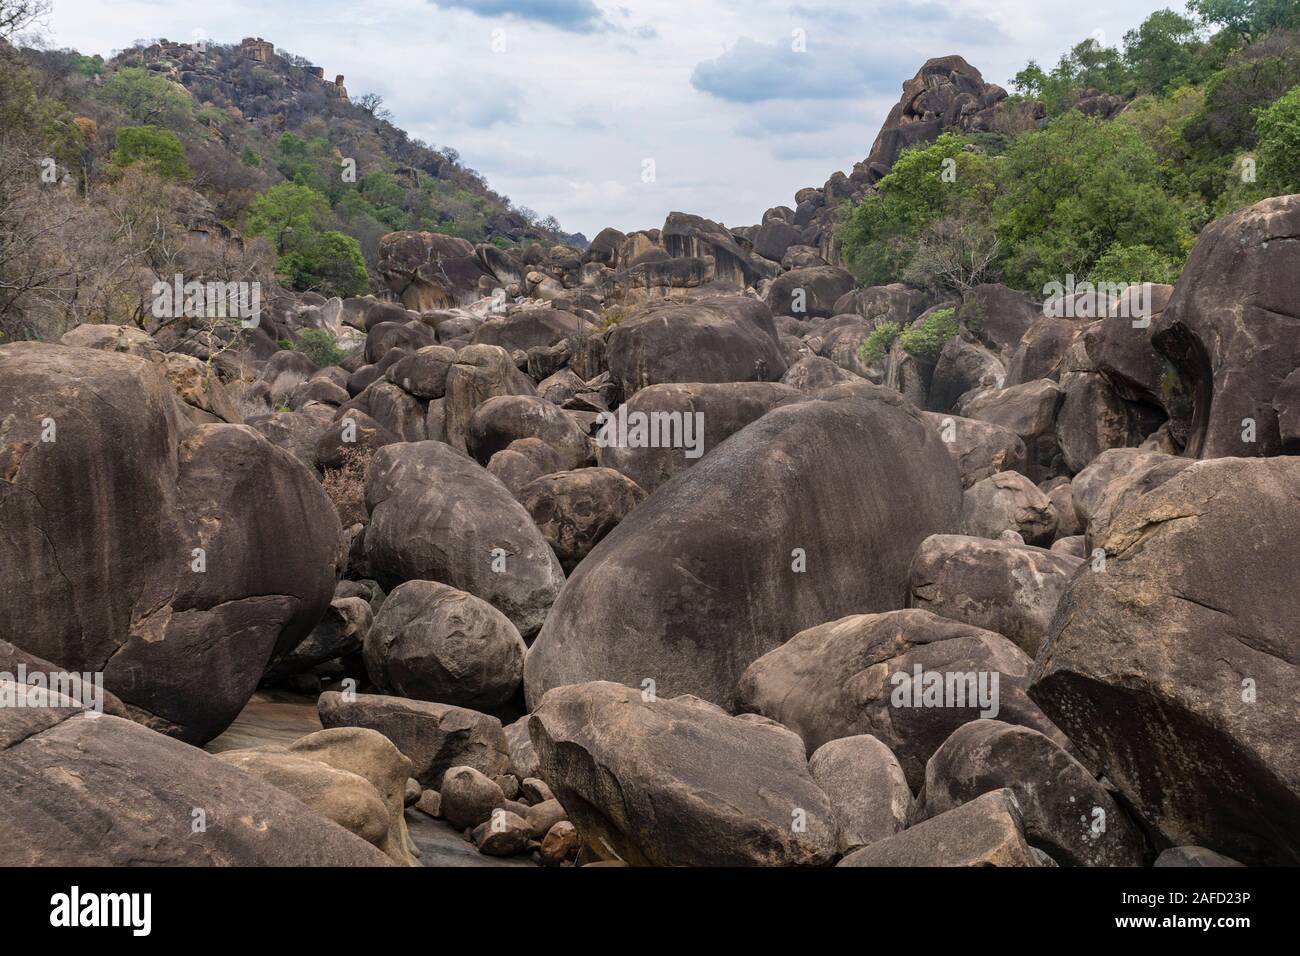 Matobo national Park, zimbabwe. Large stone mounds with a Kopje (Local term for a granite hill) in the background. Stock Photo